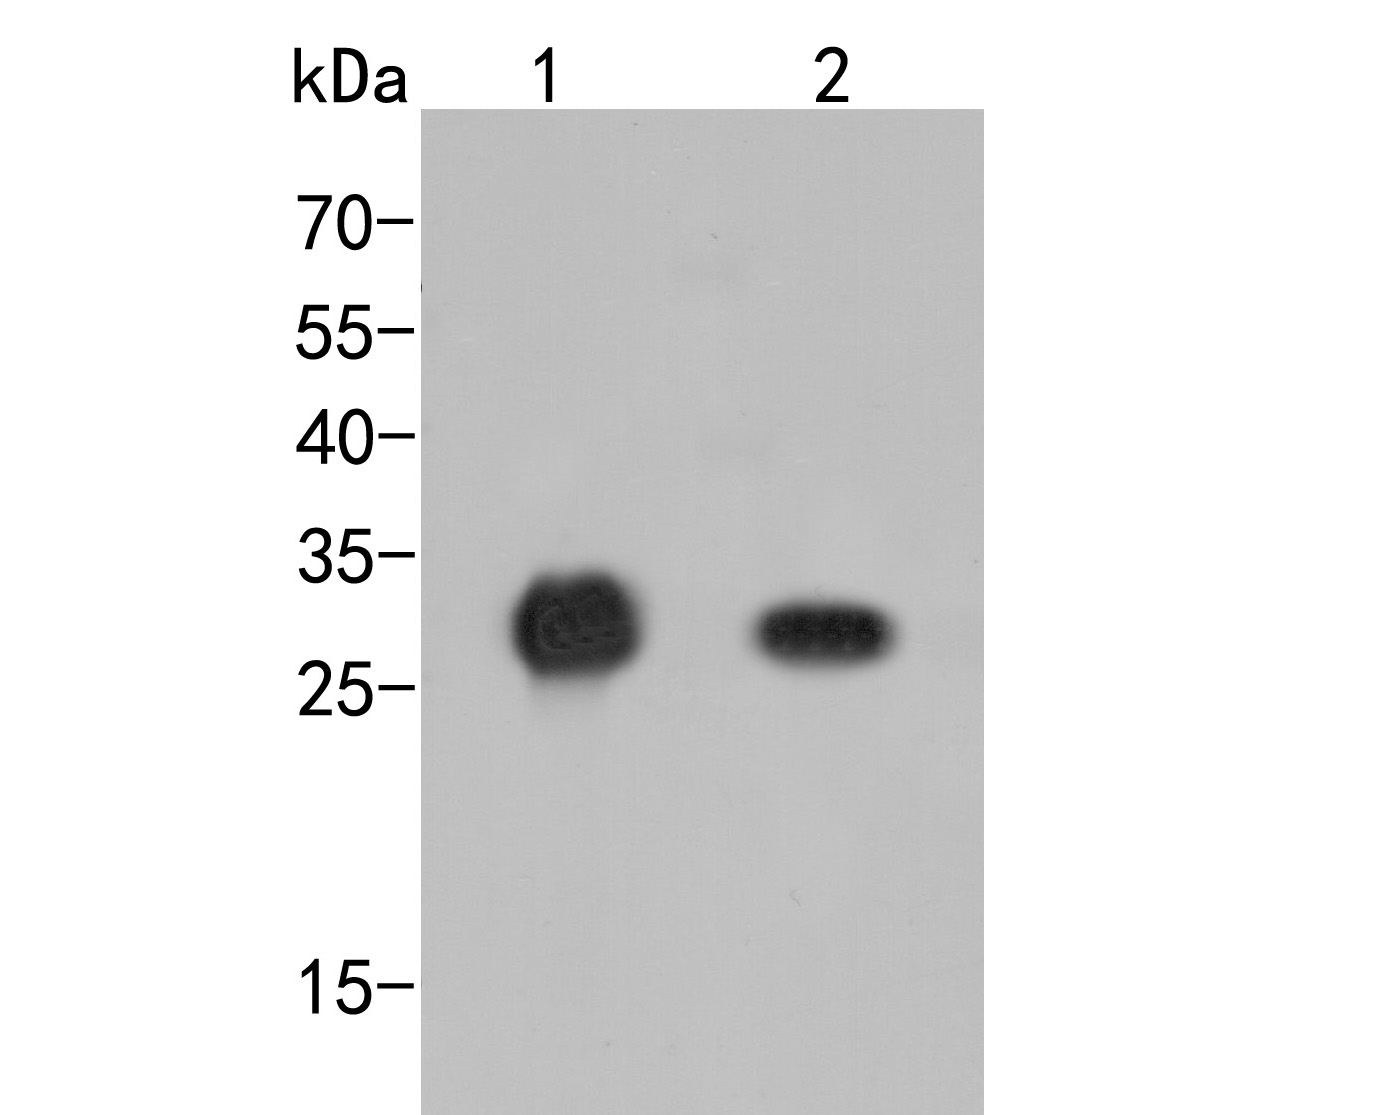 Western blot analysis of HA Tag on different lysates. Proteins were transferred to a PVDF membrane and blocked with 5% BSA in PBS for 1 hour at room temperature. The primary antibody (0906-1, 1/2,000) was used in 5% BSA at room temperature for 2 hours. Goat Anti-Rabbit IgG - HRP Secondary Antibody (HA1001) at 1:5,000 dilution was used for 1 hour at room temperature.<br />
Positive control:<br />
Lane 1: C-terminal HA-tagged recombinant protein<br />
Lane 2: N-terminal HA-tagged recombinant protein